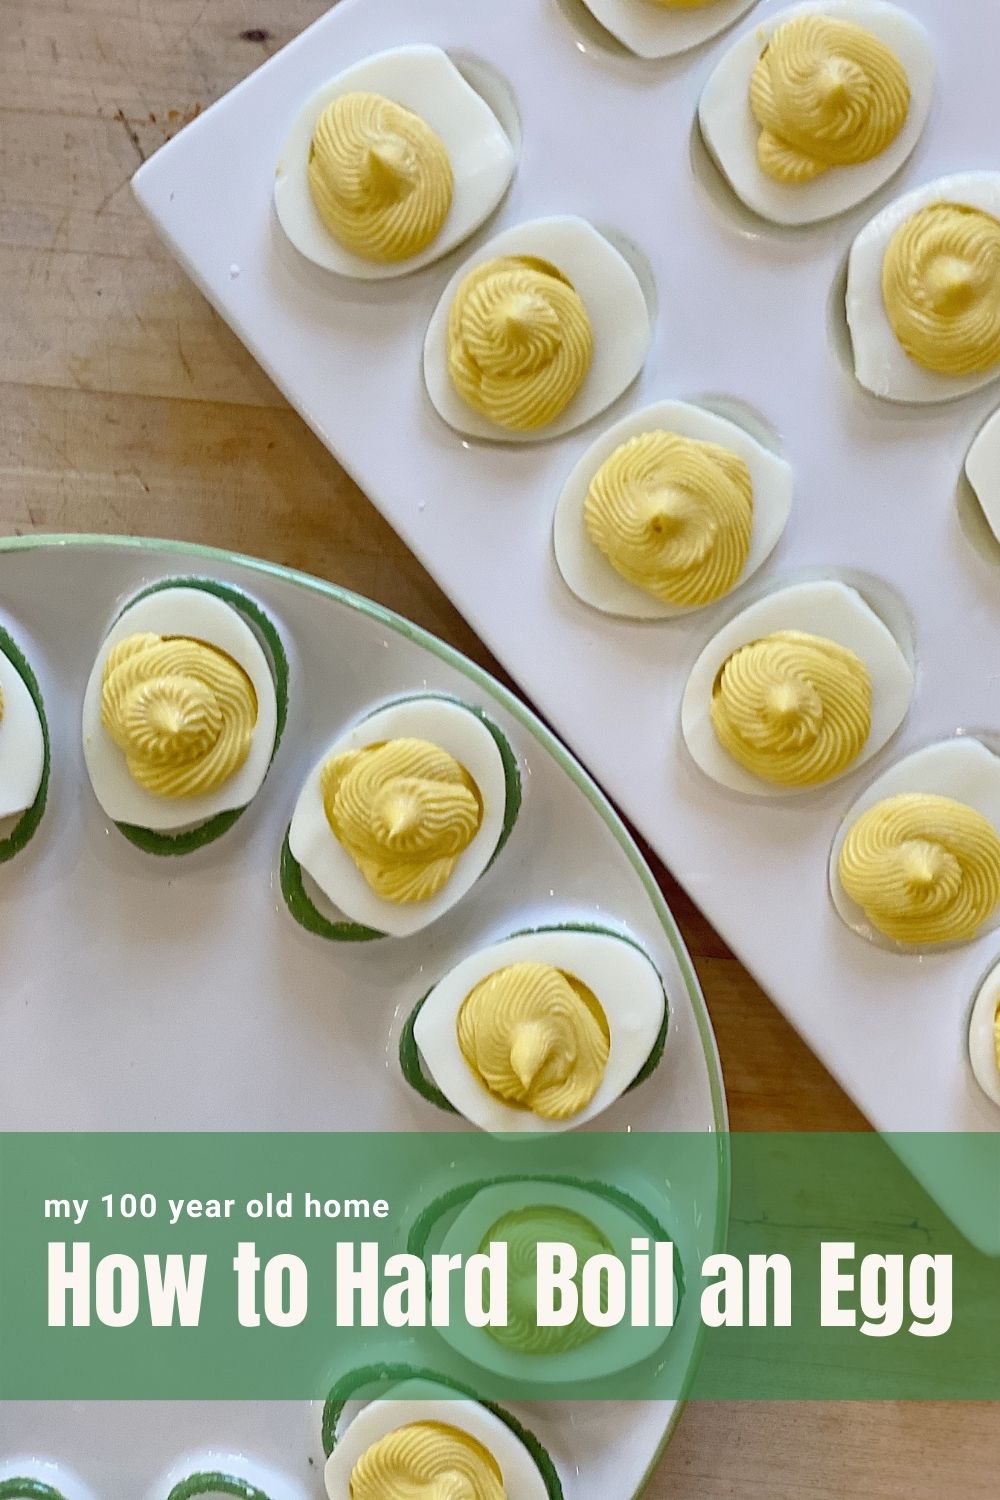 Why is it that eggs are so hard to boil perfectly? Today I am going to share the secrets to how long to hard boil an egg and the best deviled egg recipe.